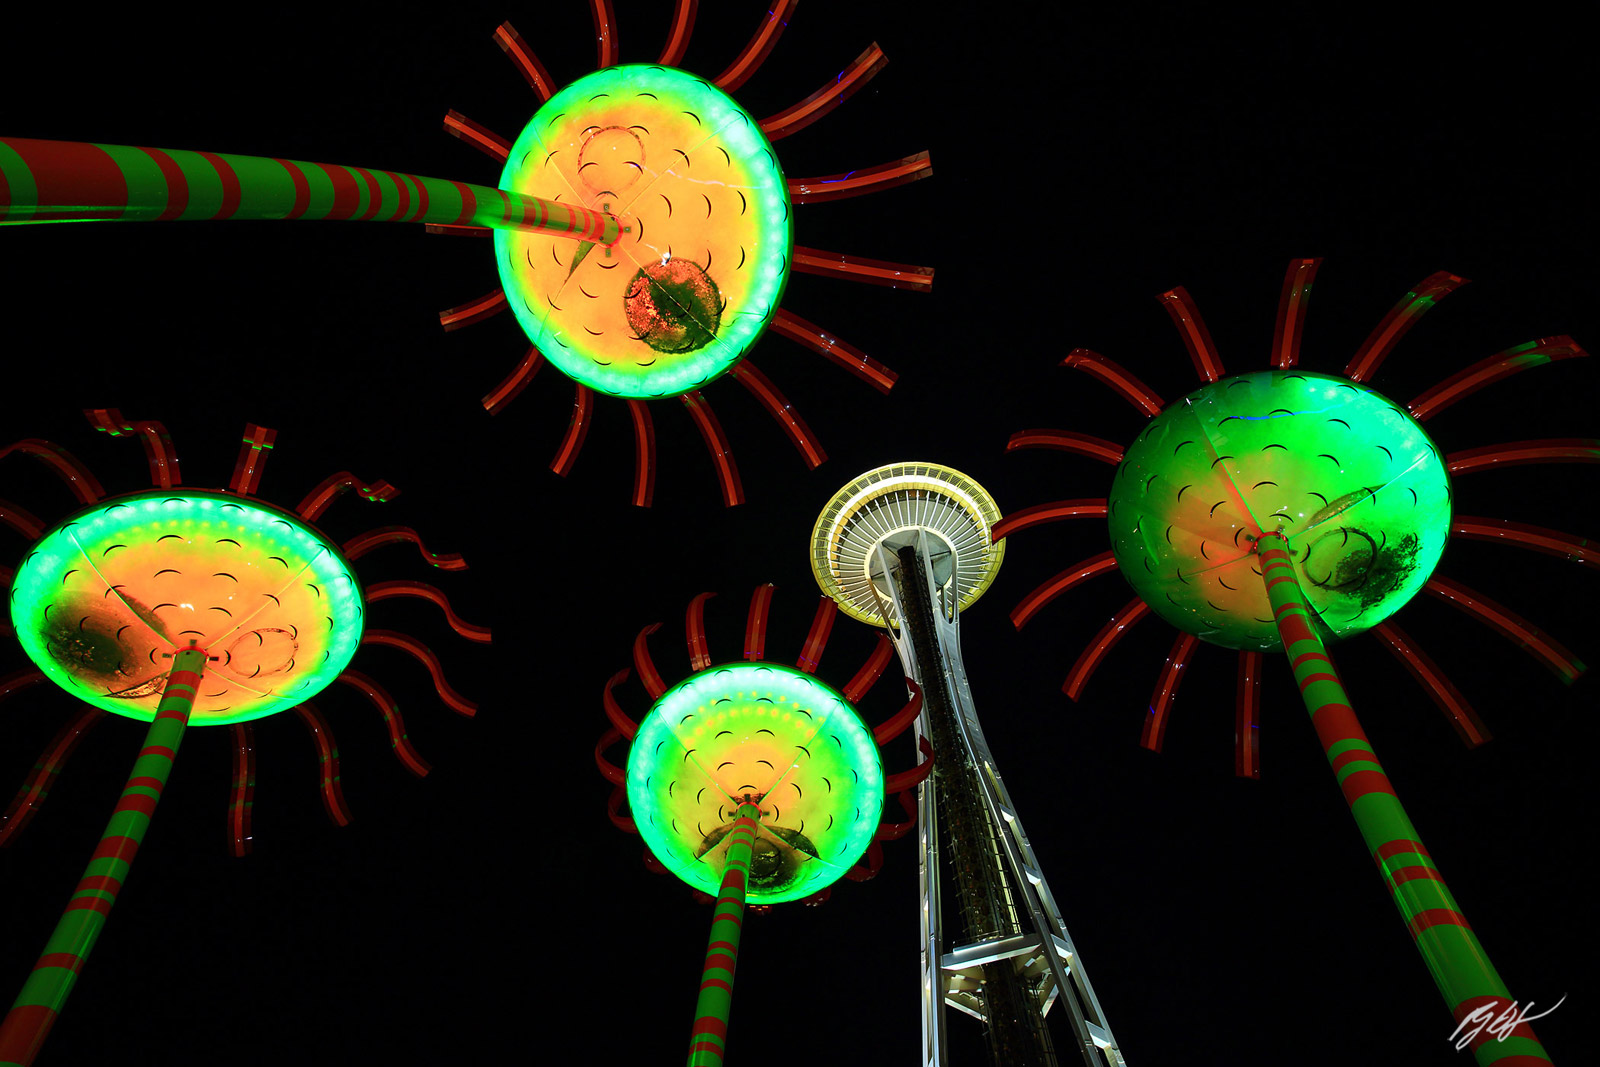 Giant Singing Flower Sculpture and the Space Needle in Seattle Center in Seattle, Washington